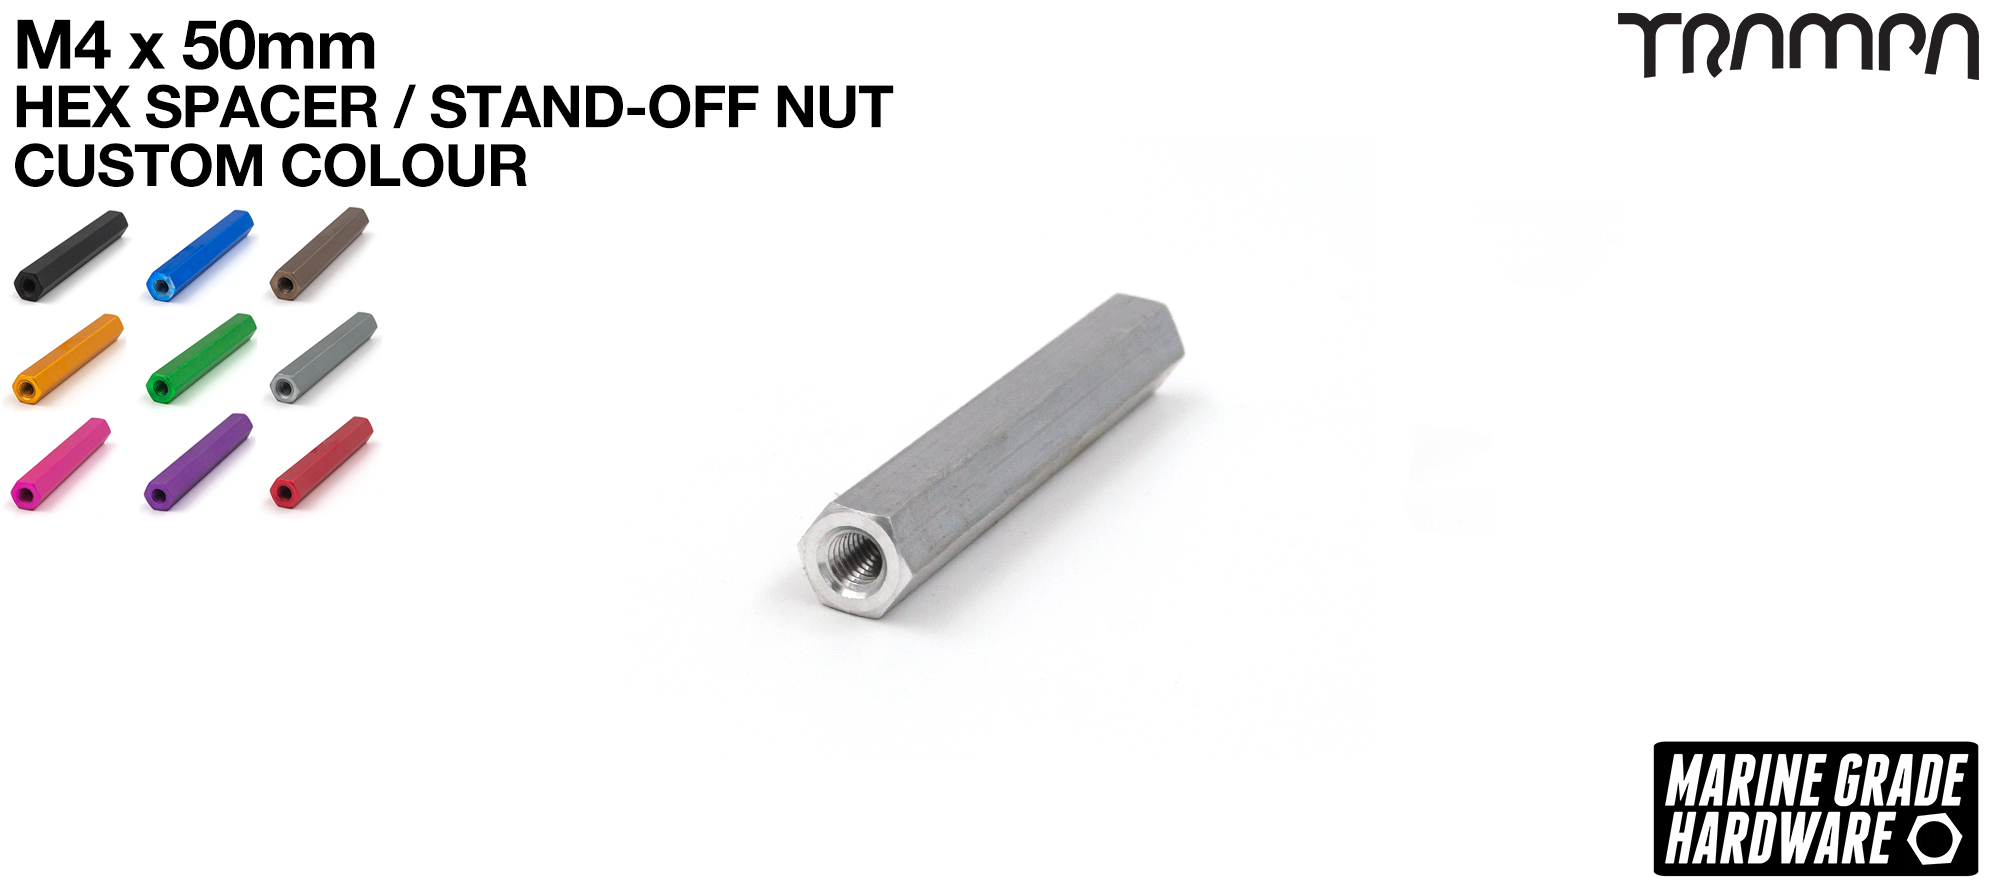 M4 x 50mm Aluminium Threaded Spacer Nut Used for assemblying the Battery Boxes